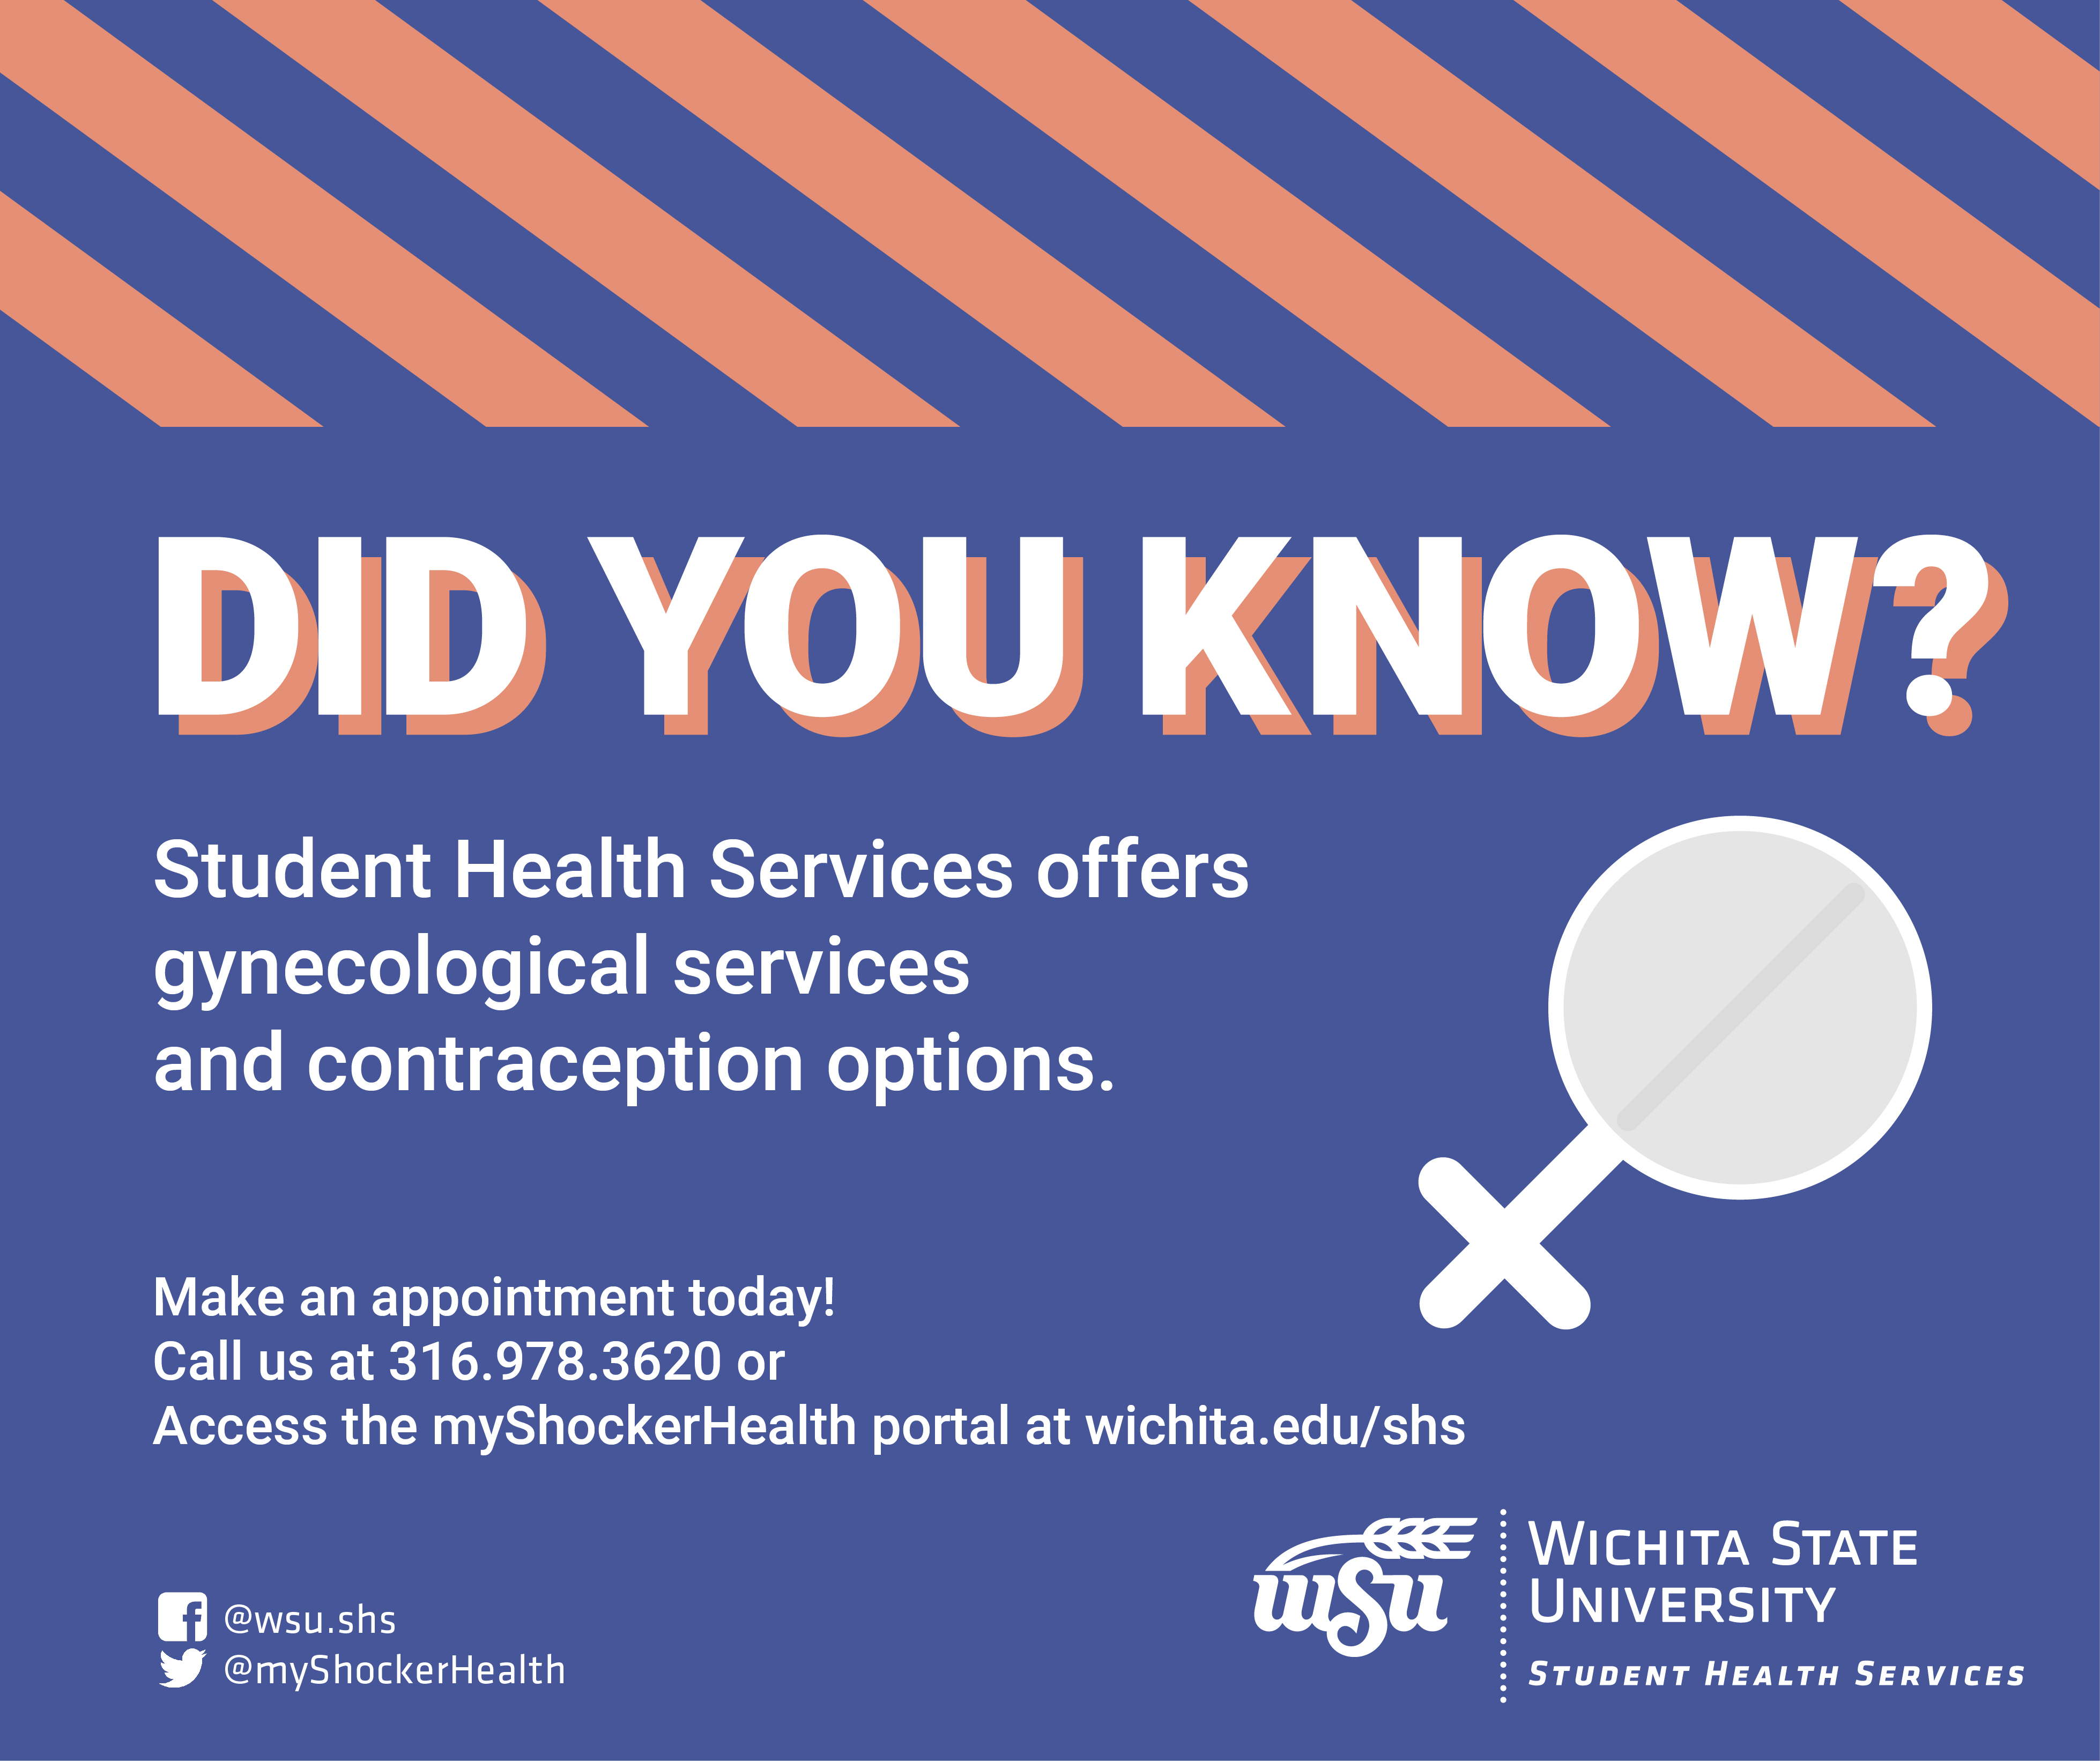 Student Health Services gynecological and contraceptive services